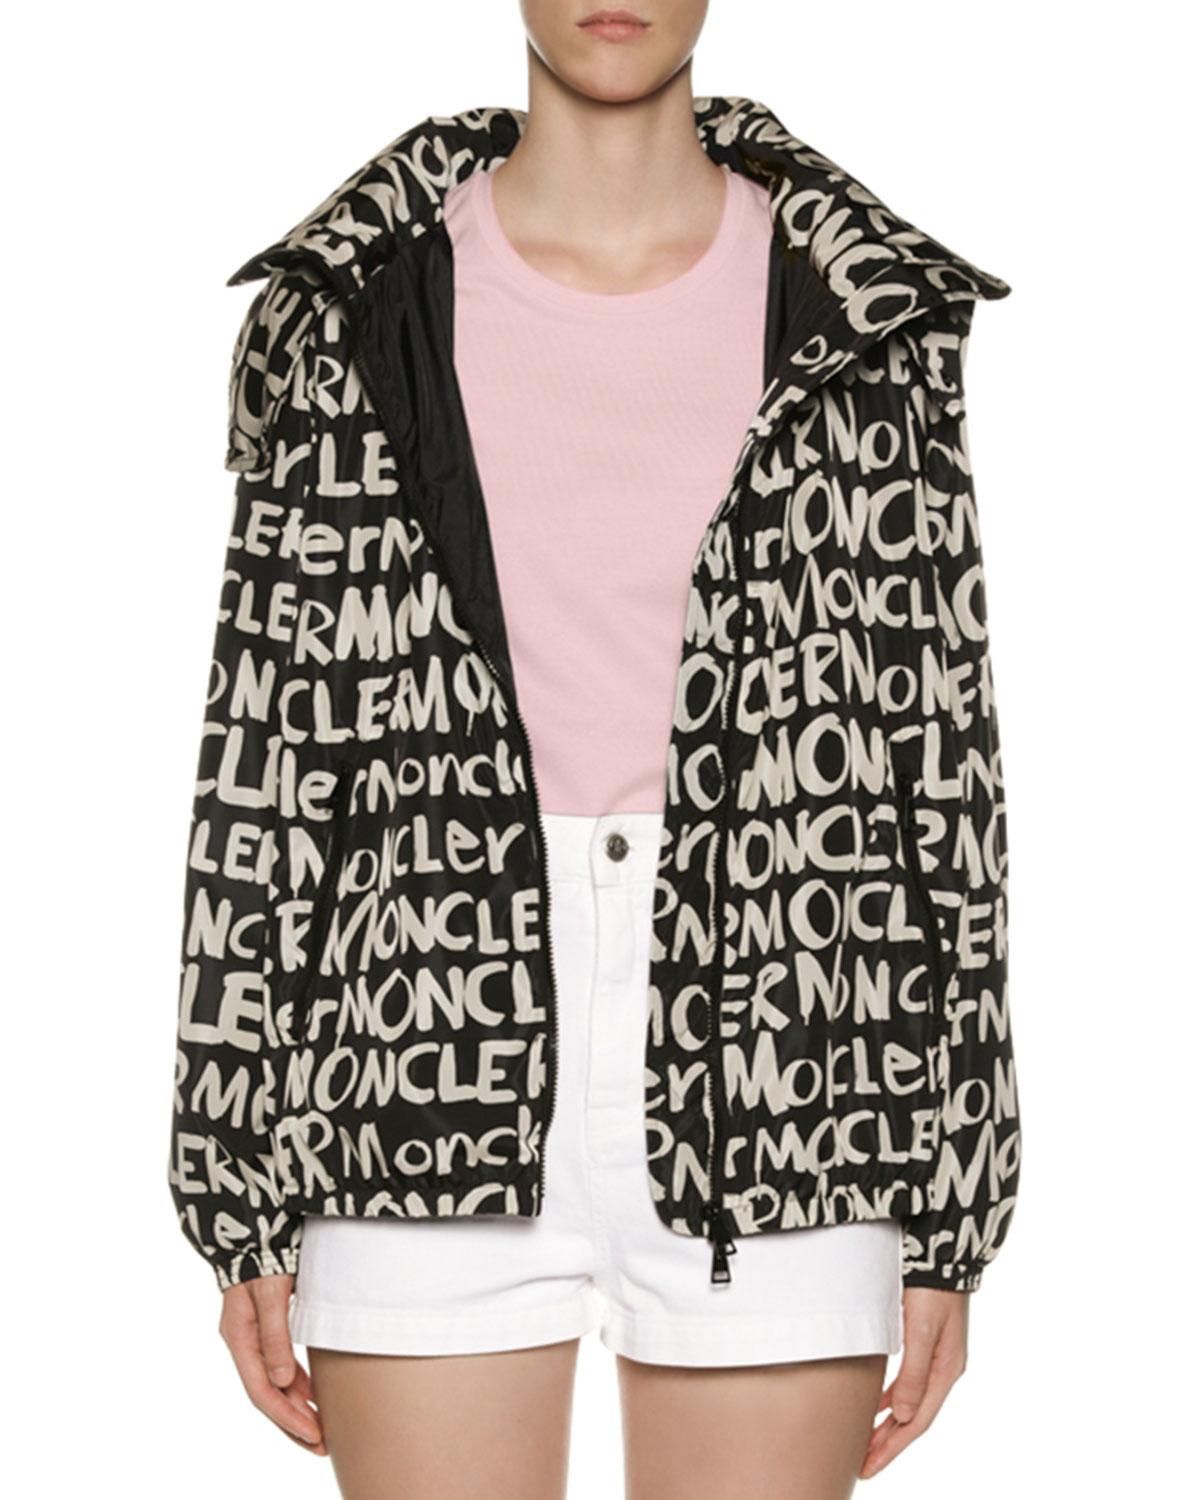 Moncler Synthetic Graffiti Puffer Jacket in Black/White (Black) - Save ...